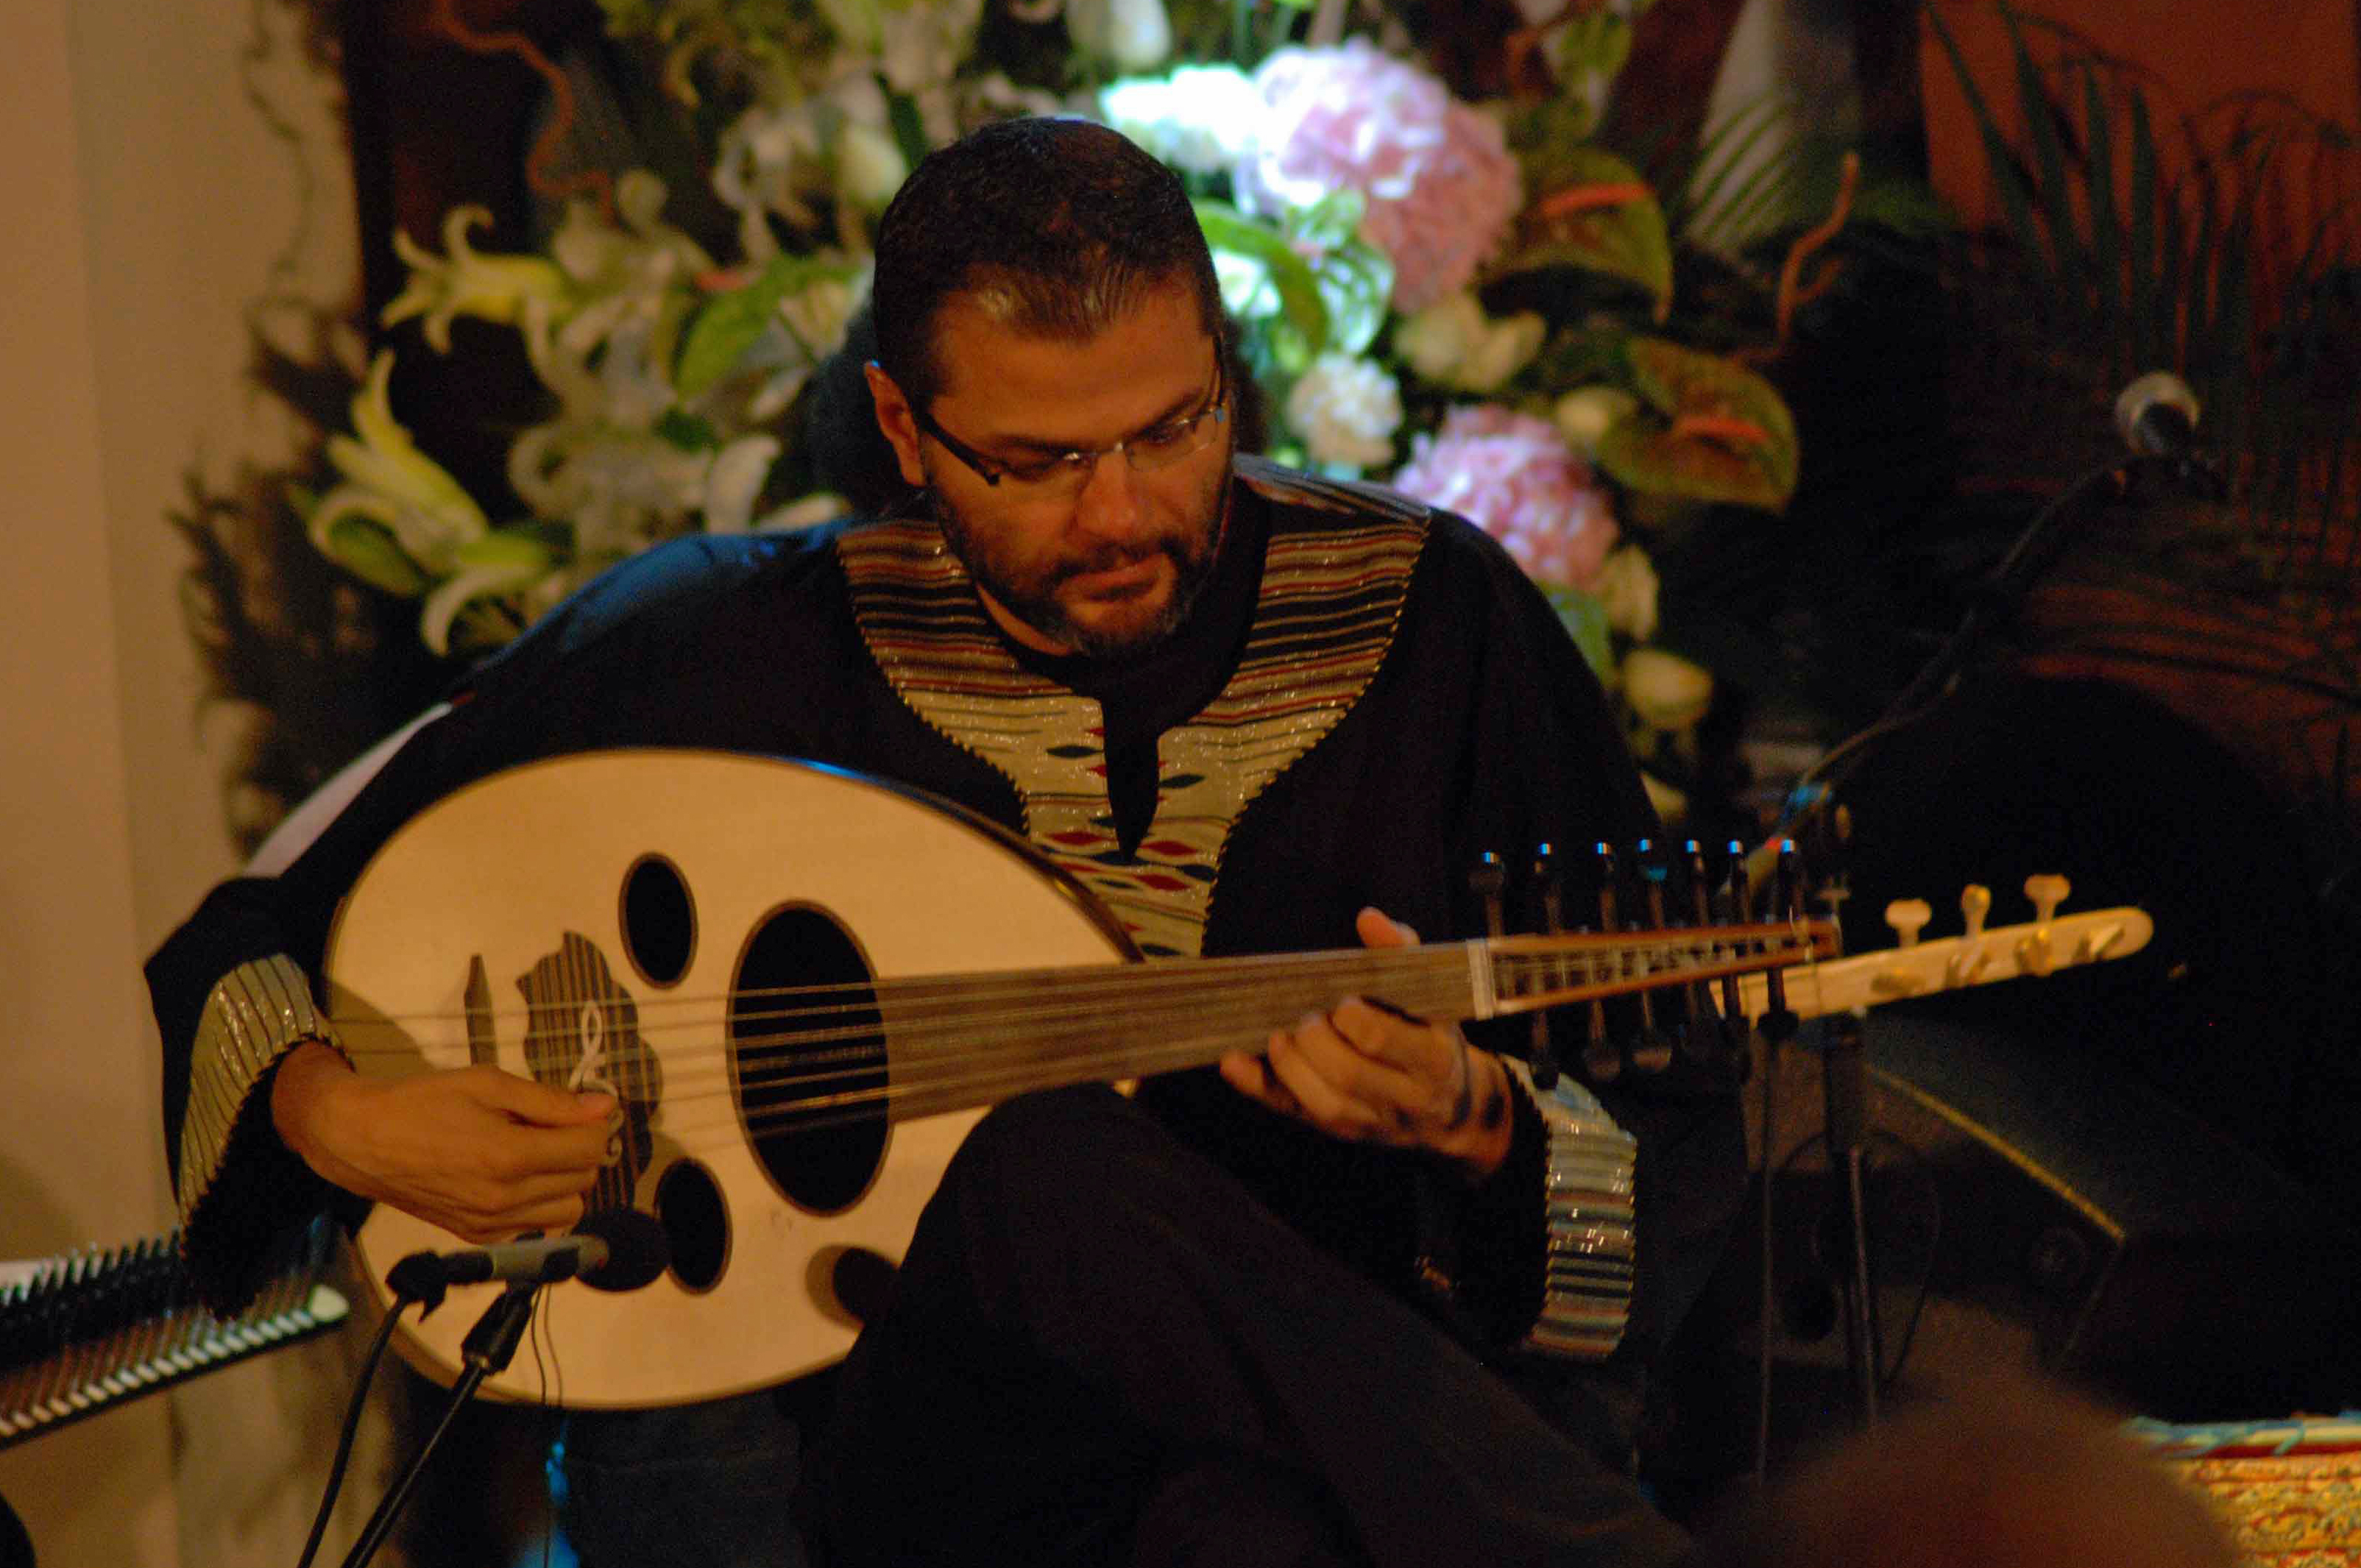 Renowned artist Charbel Rouhana was the music director for Remix 2011. Photo: Prime Vision Studios